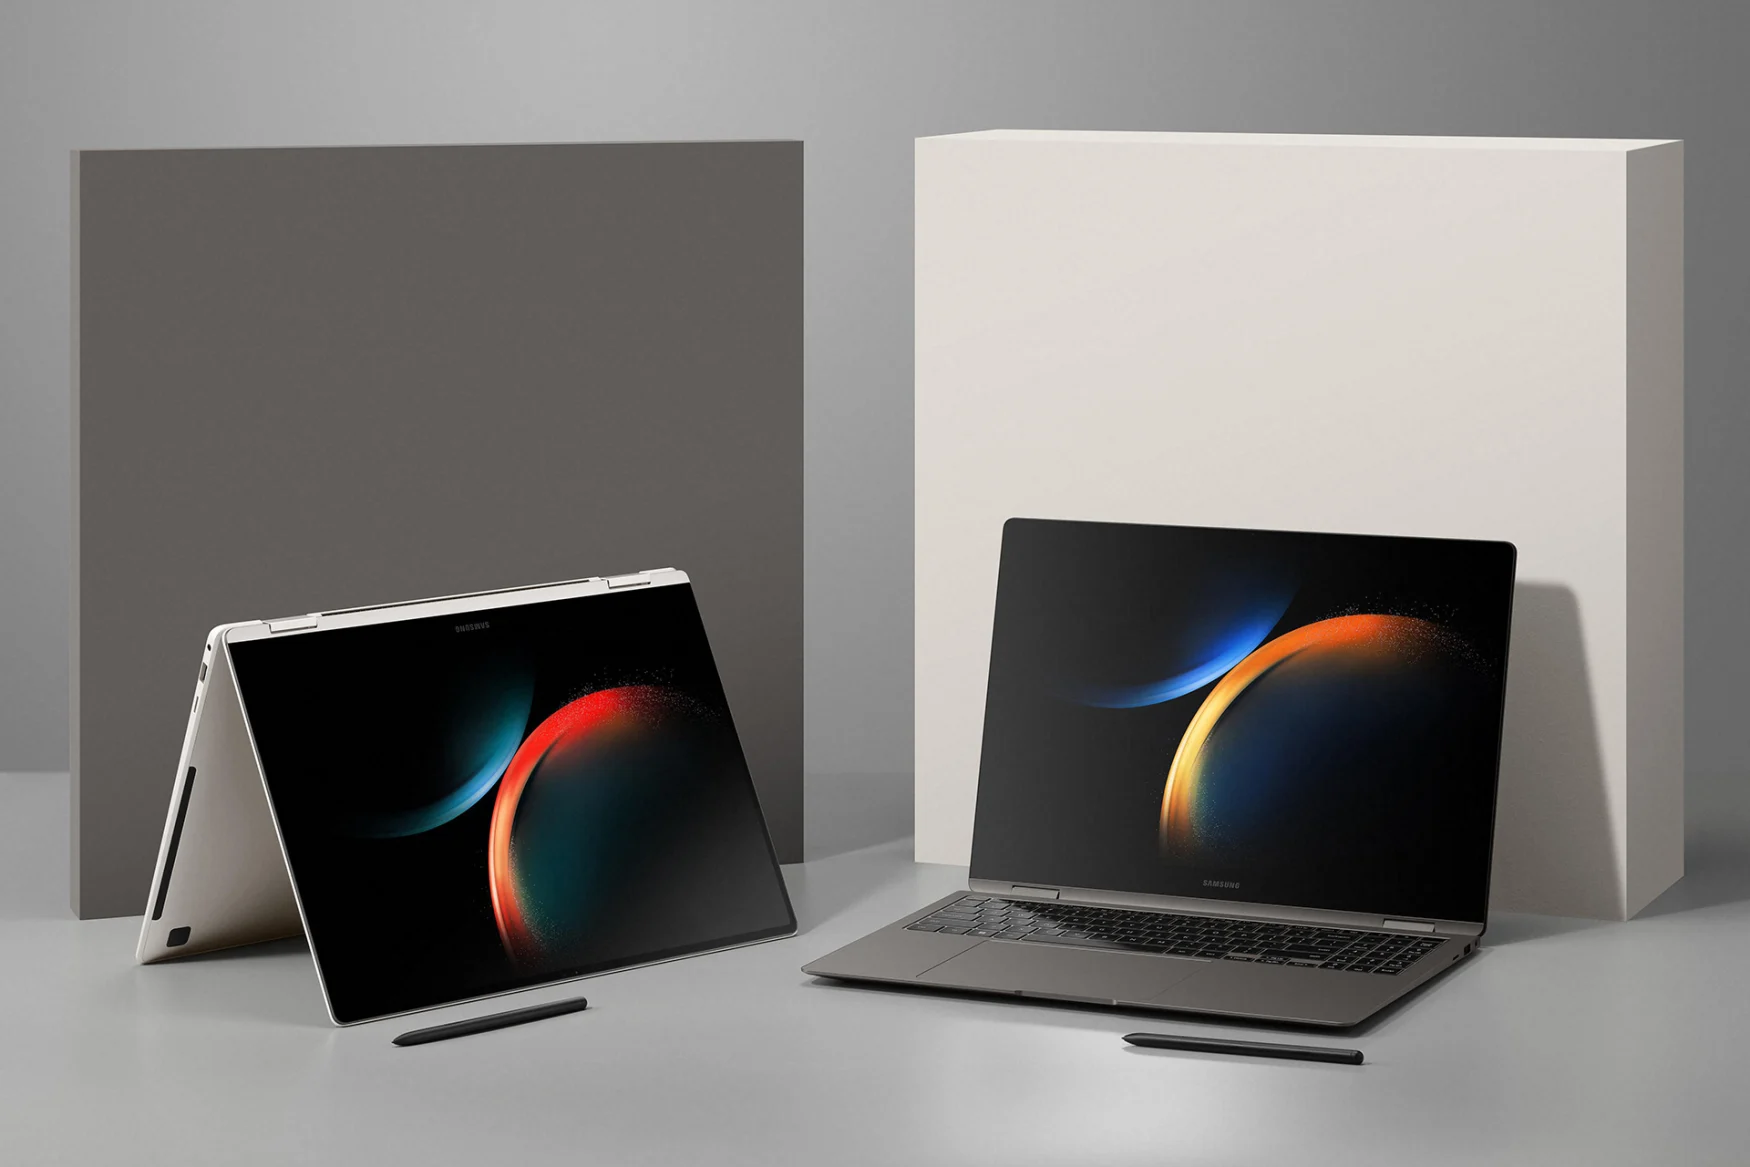 Samsung’s Galaxy Book 3 Ultra laptop includes AMOLED screen tech borrowed from phones